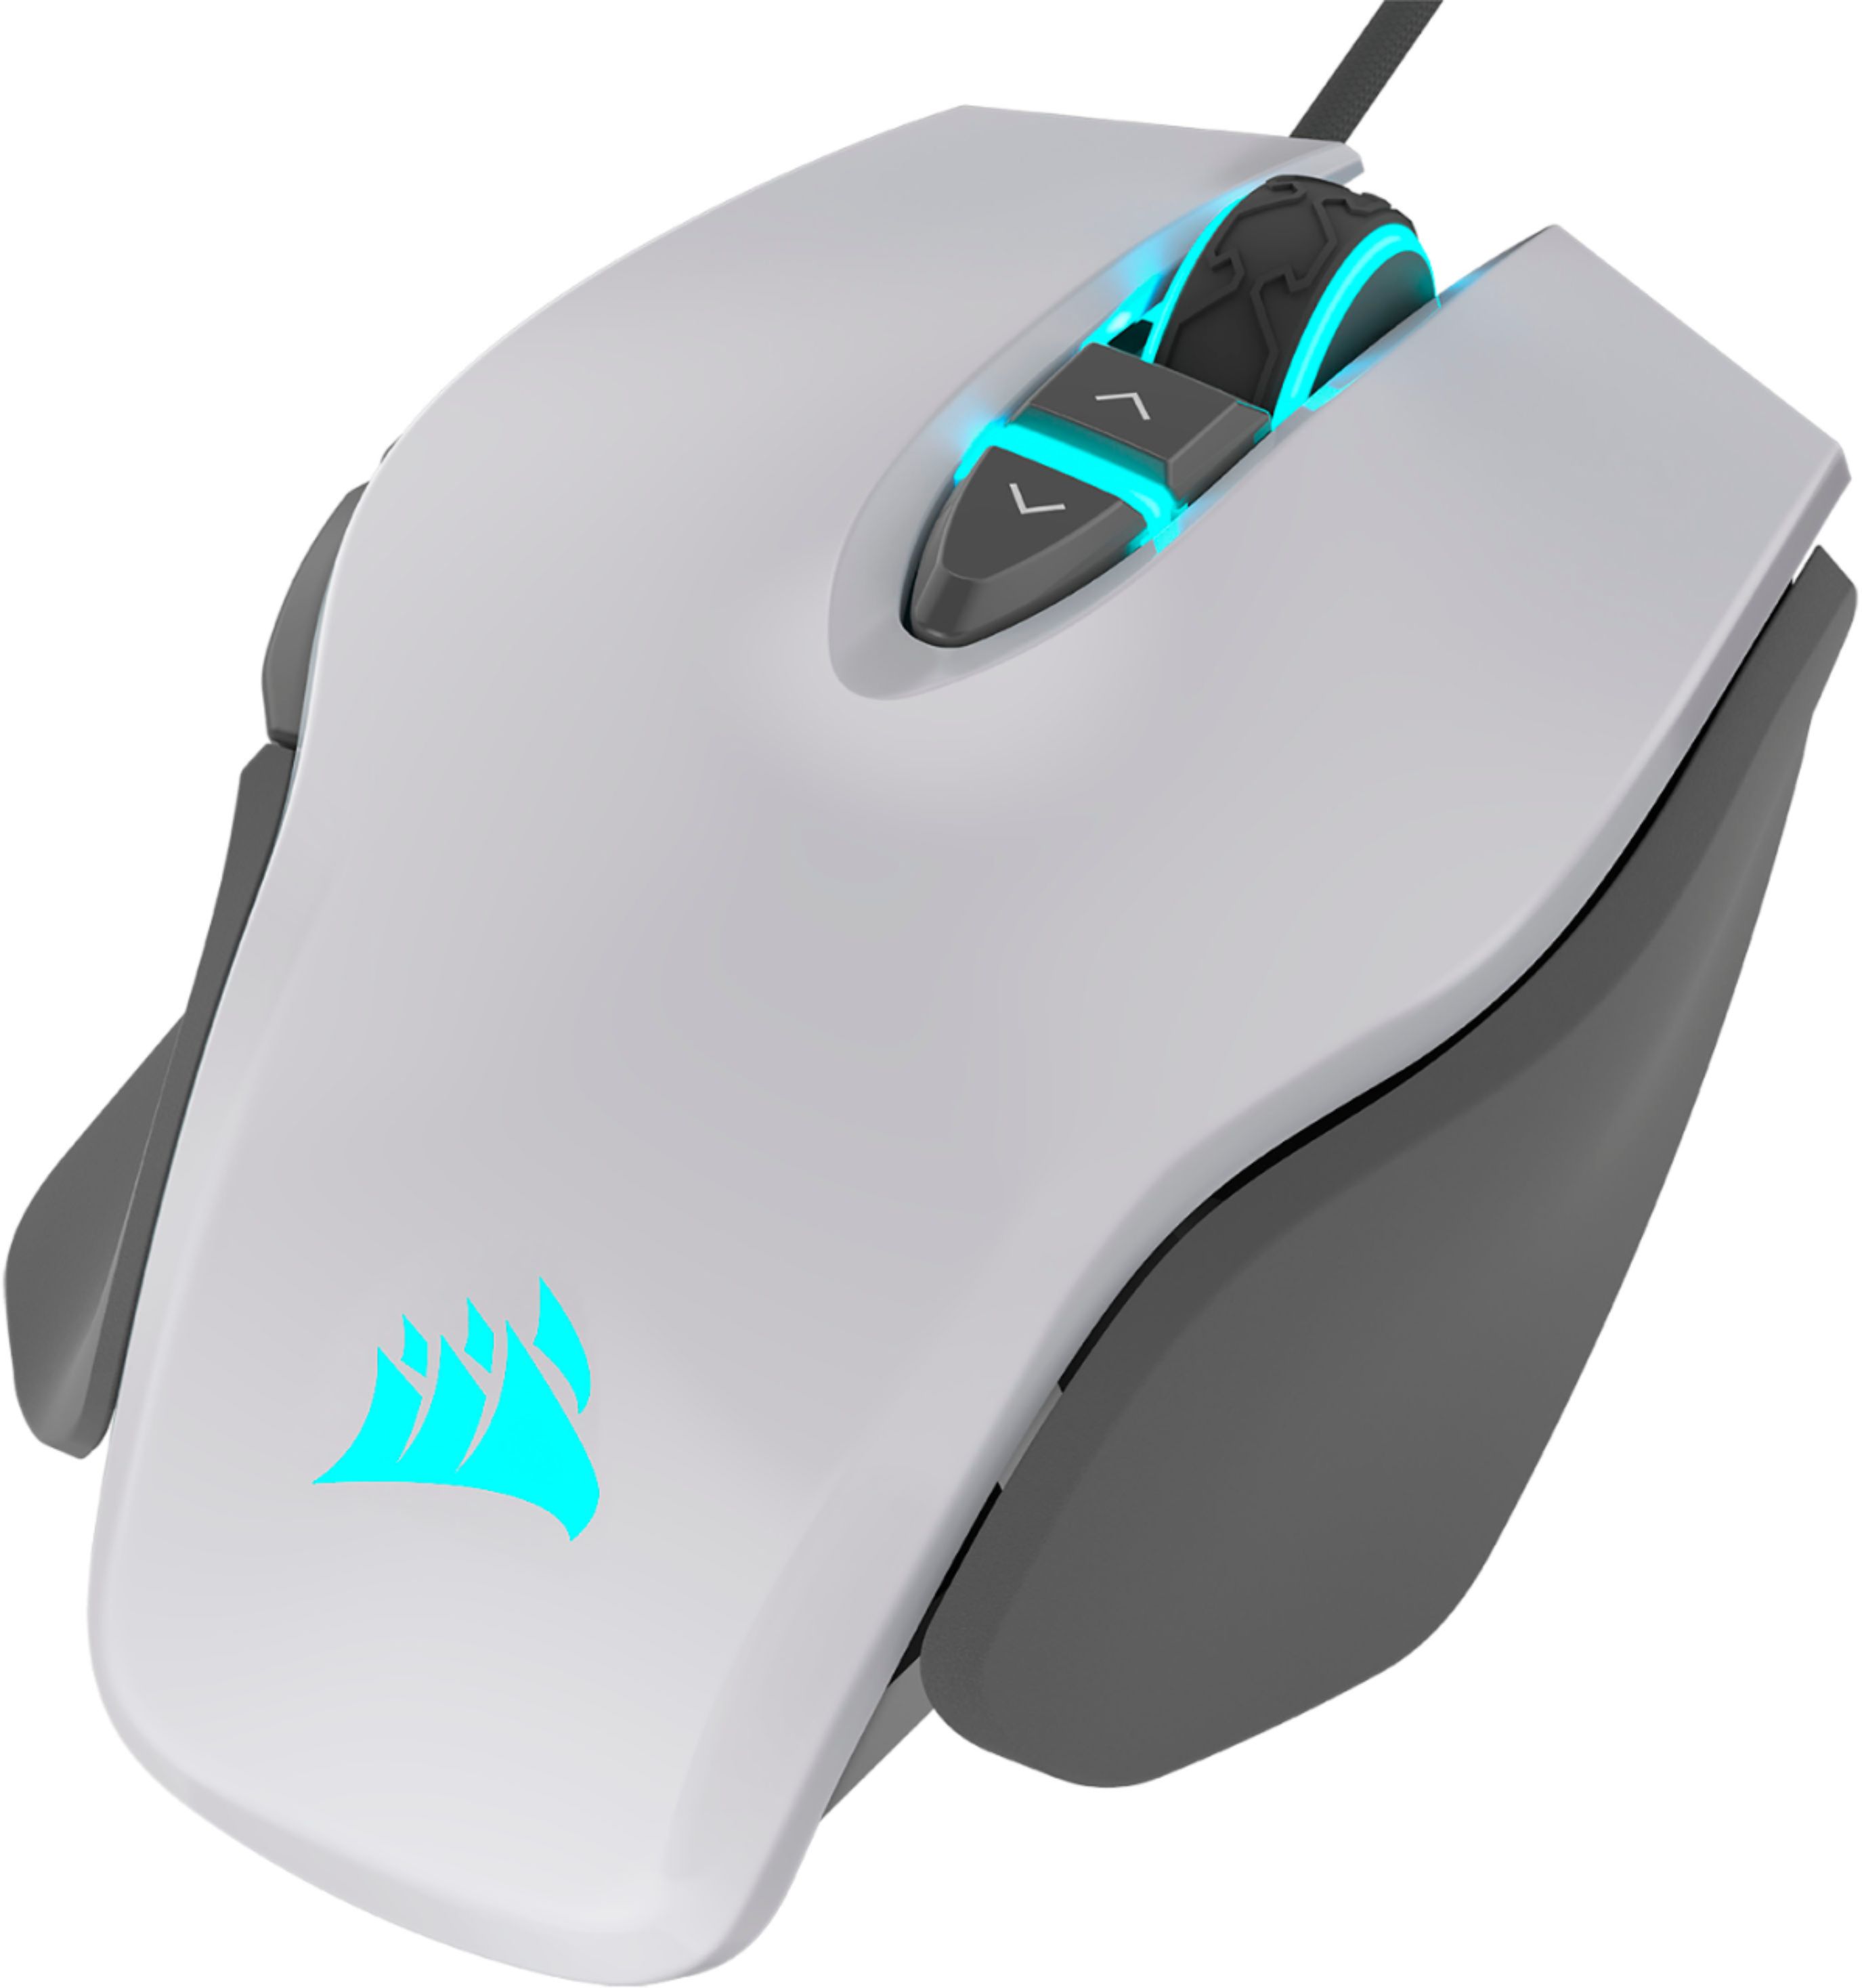 CORSAIR M65 RGB Elite Tunable FPS Wired Optical Gaming Mouse with 